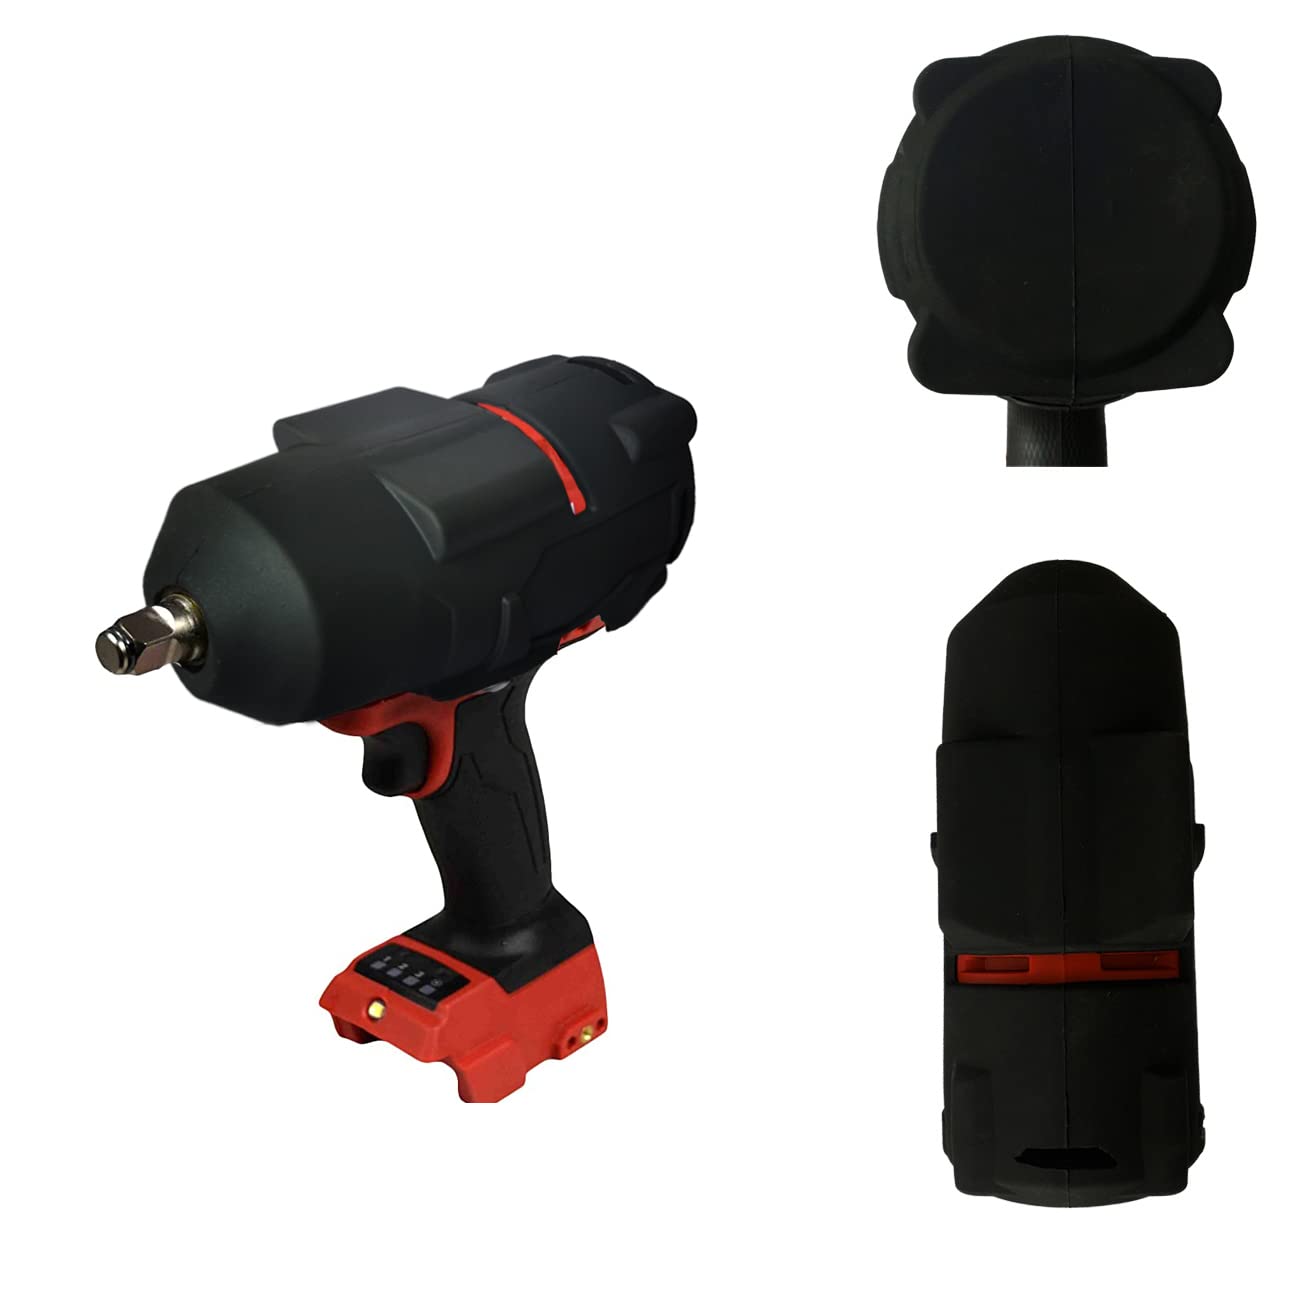 NXPOXS 49-16-2767 High Torque Impact Protective Boot Fit for Milwaukee M18 FUEL Torque Impact Wrench 2767-20 & 2863-20